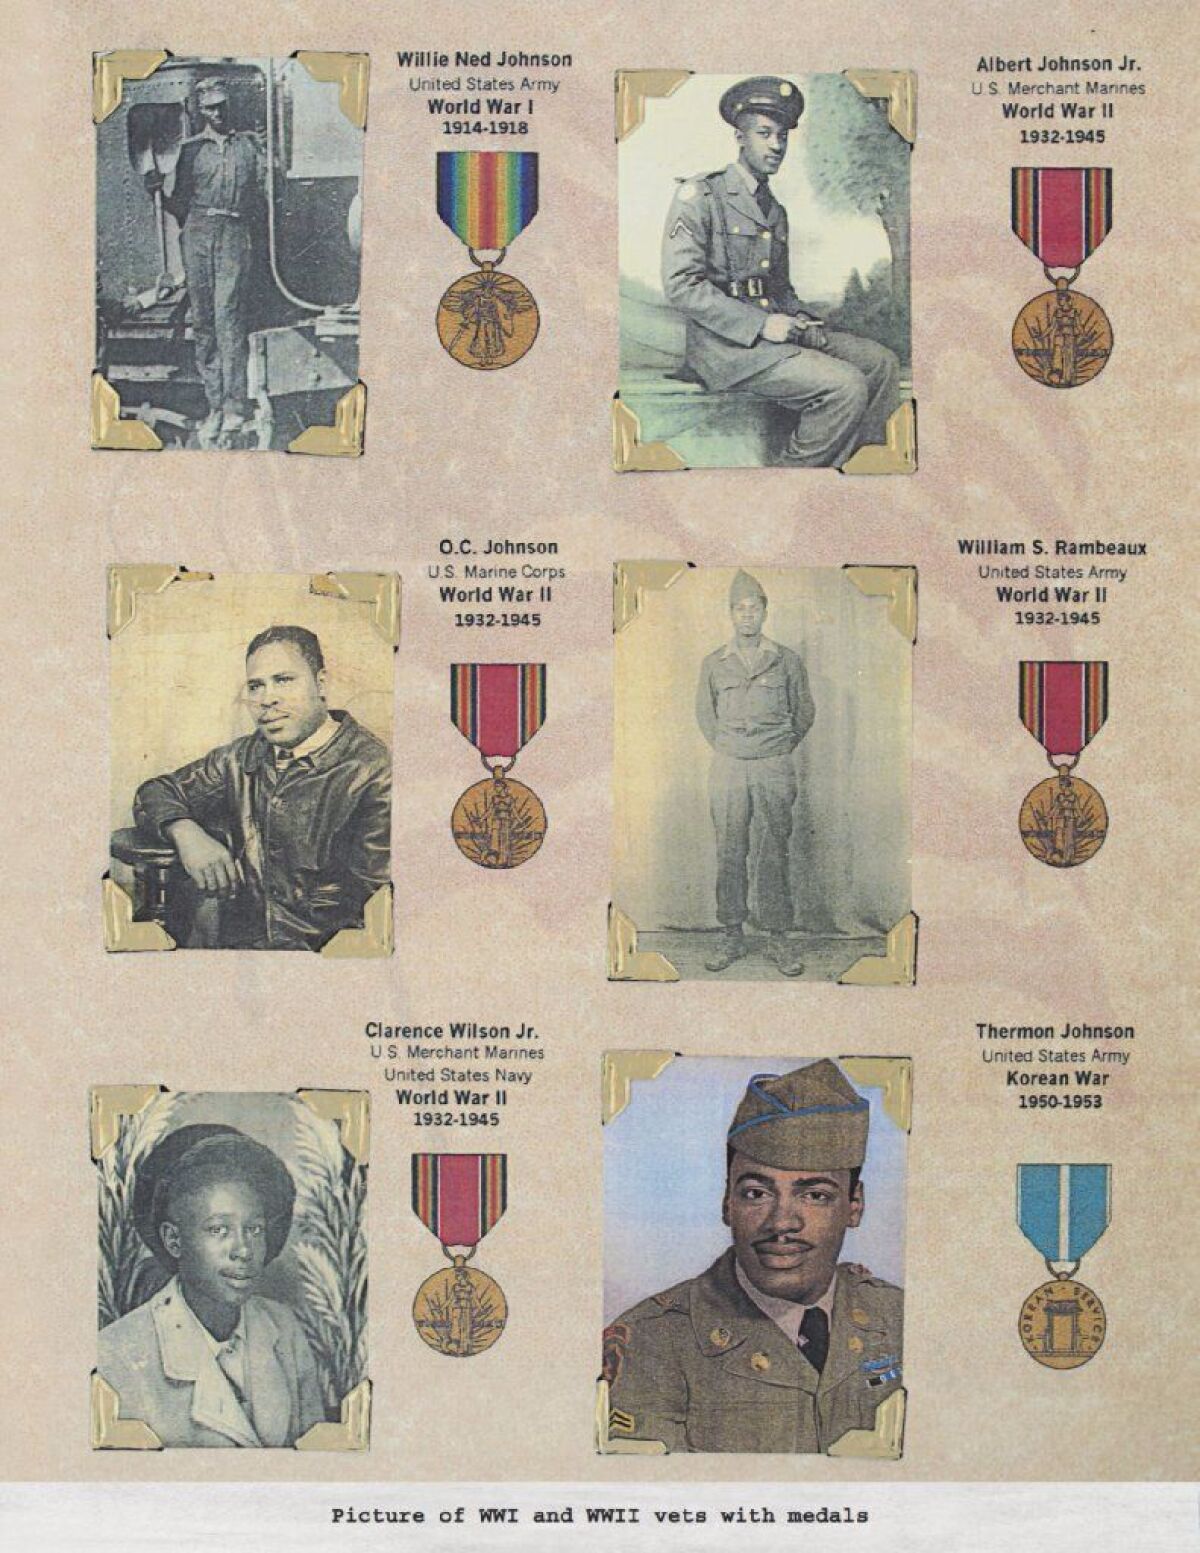 A page from Earnestine Smith's journal depicting family members who were veterans and their medals.